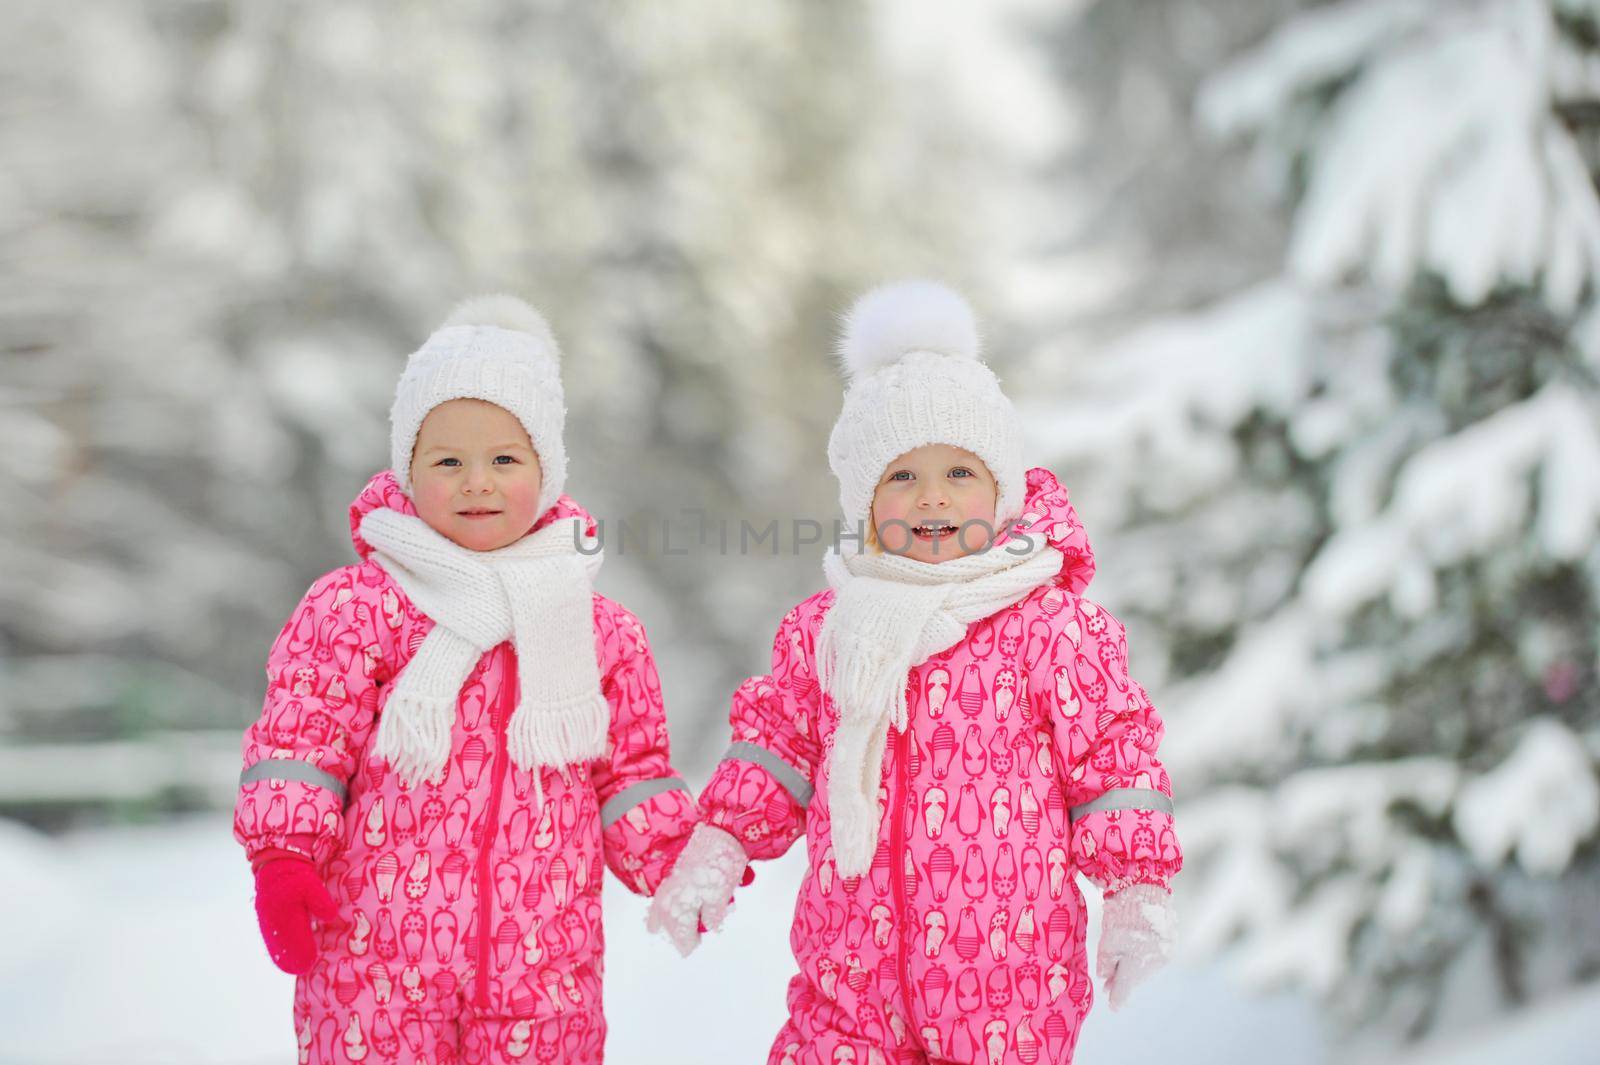 Two little twin girls in red suits stand in a snowy winter forest.